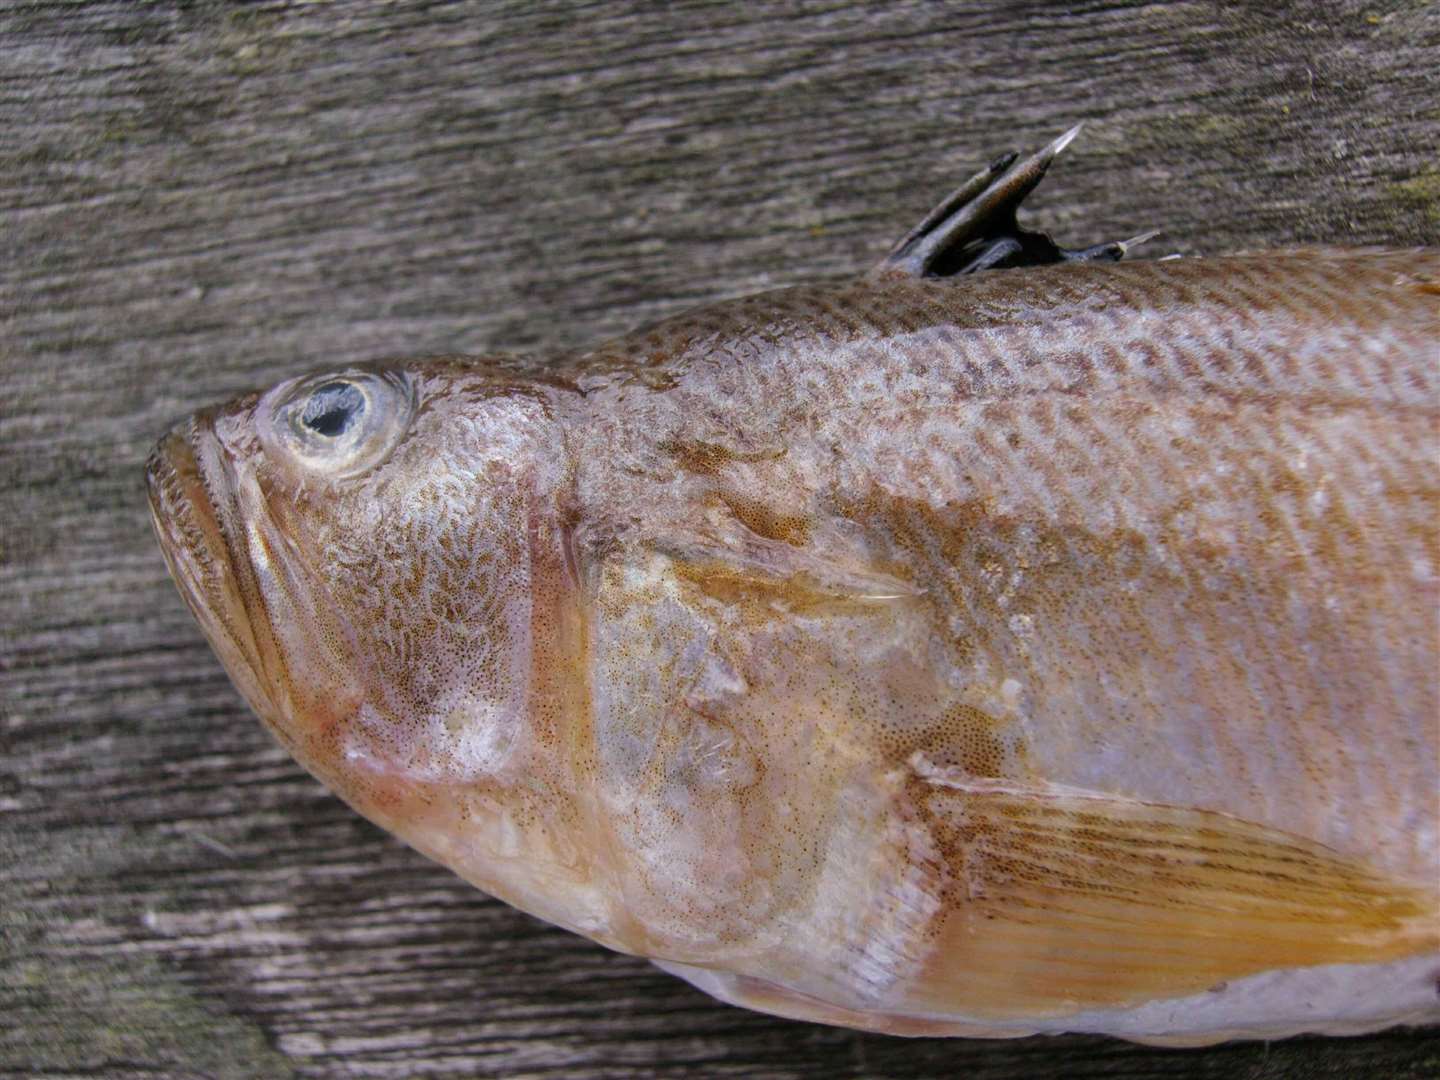 The weever fish has spines on its back that can deliver a nasty sting. Photo: Stock photo.